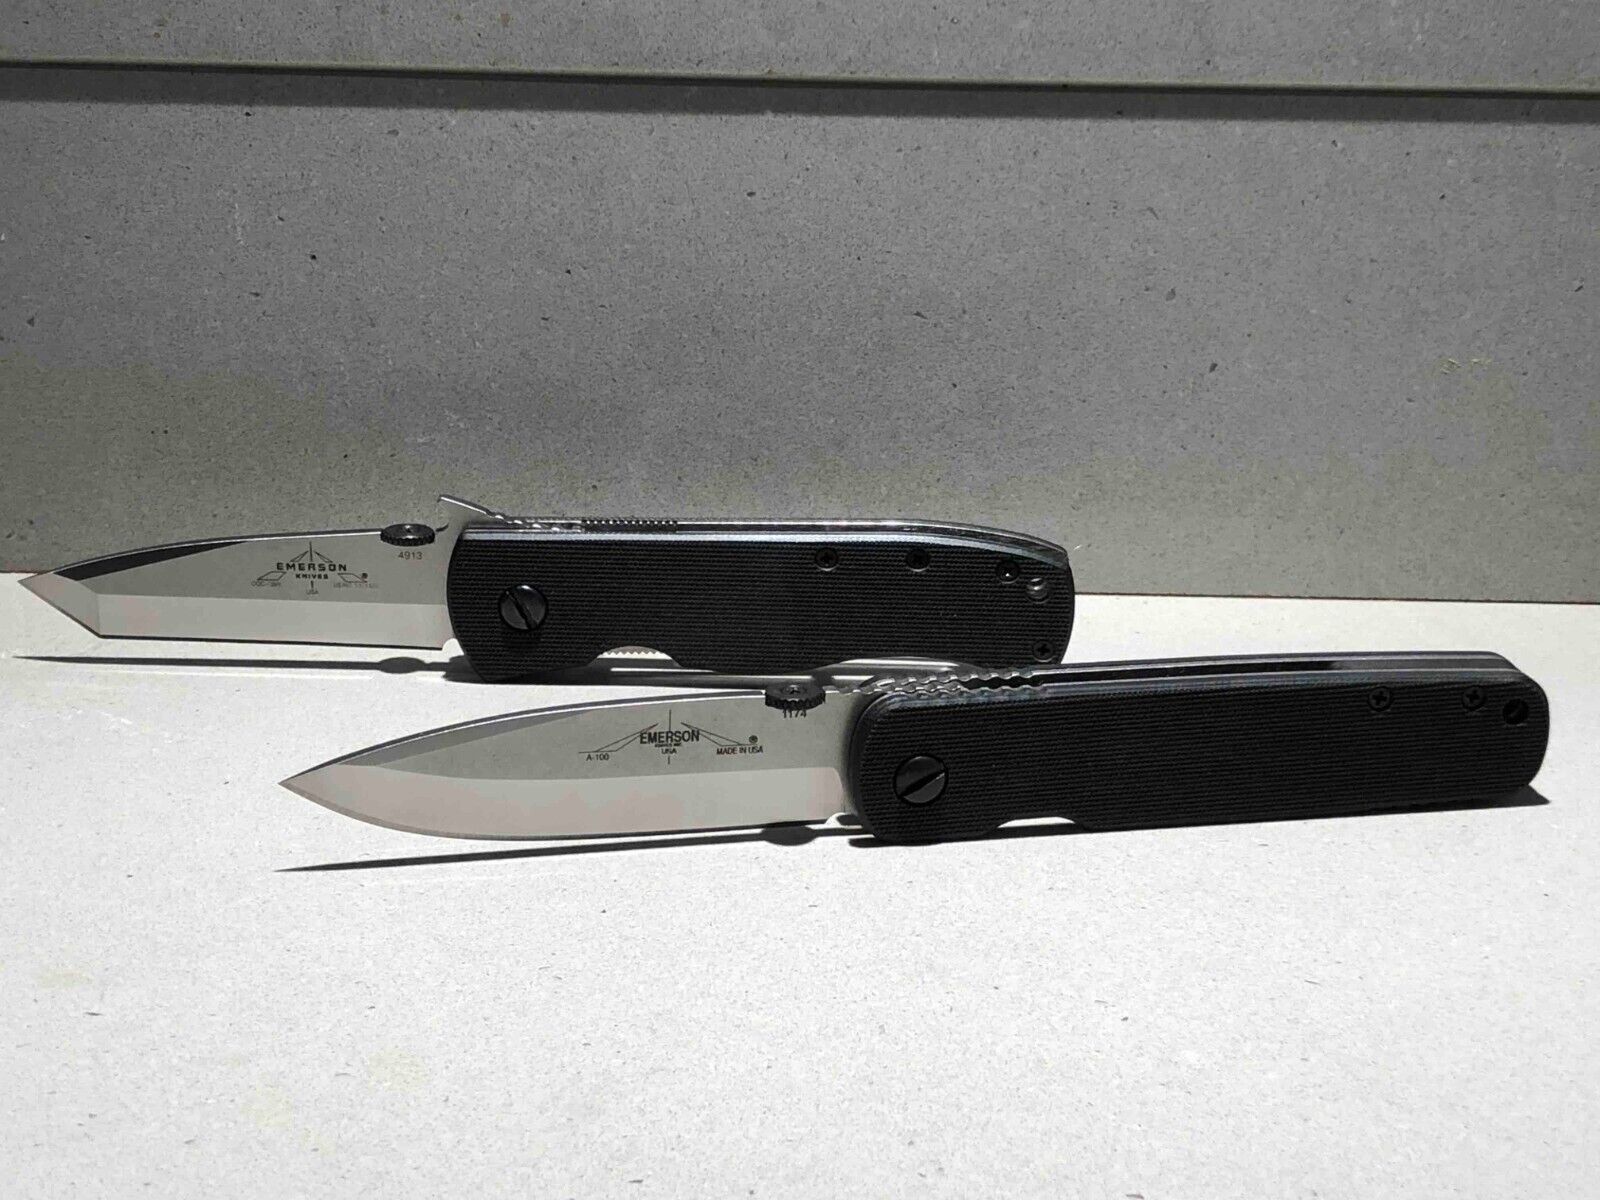 Emerson Knives CQC-7 BW SF + A-100 SF Paired Set.